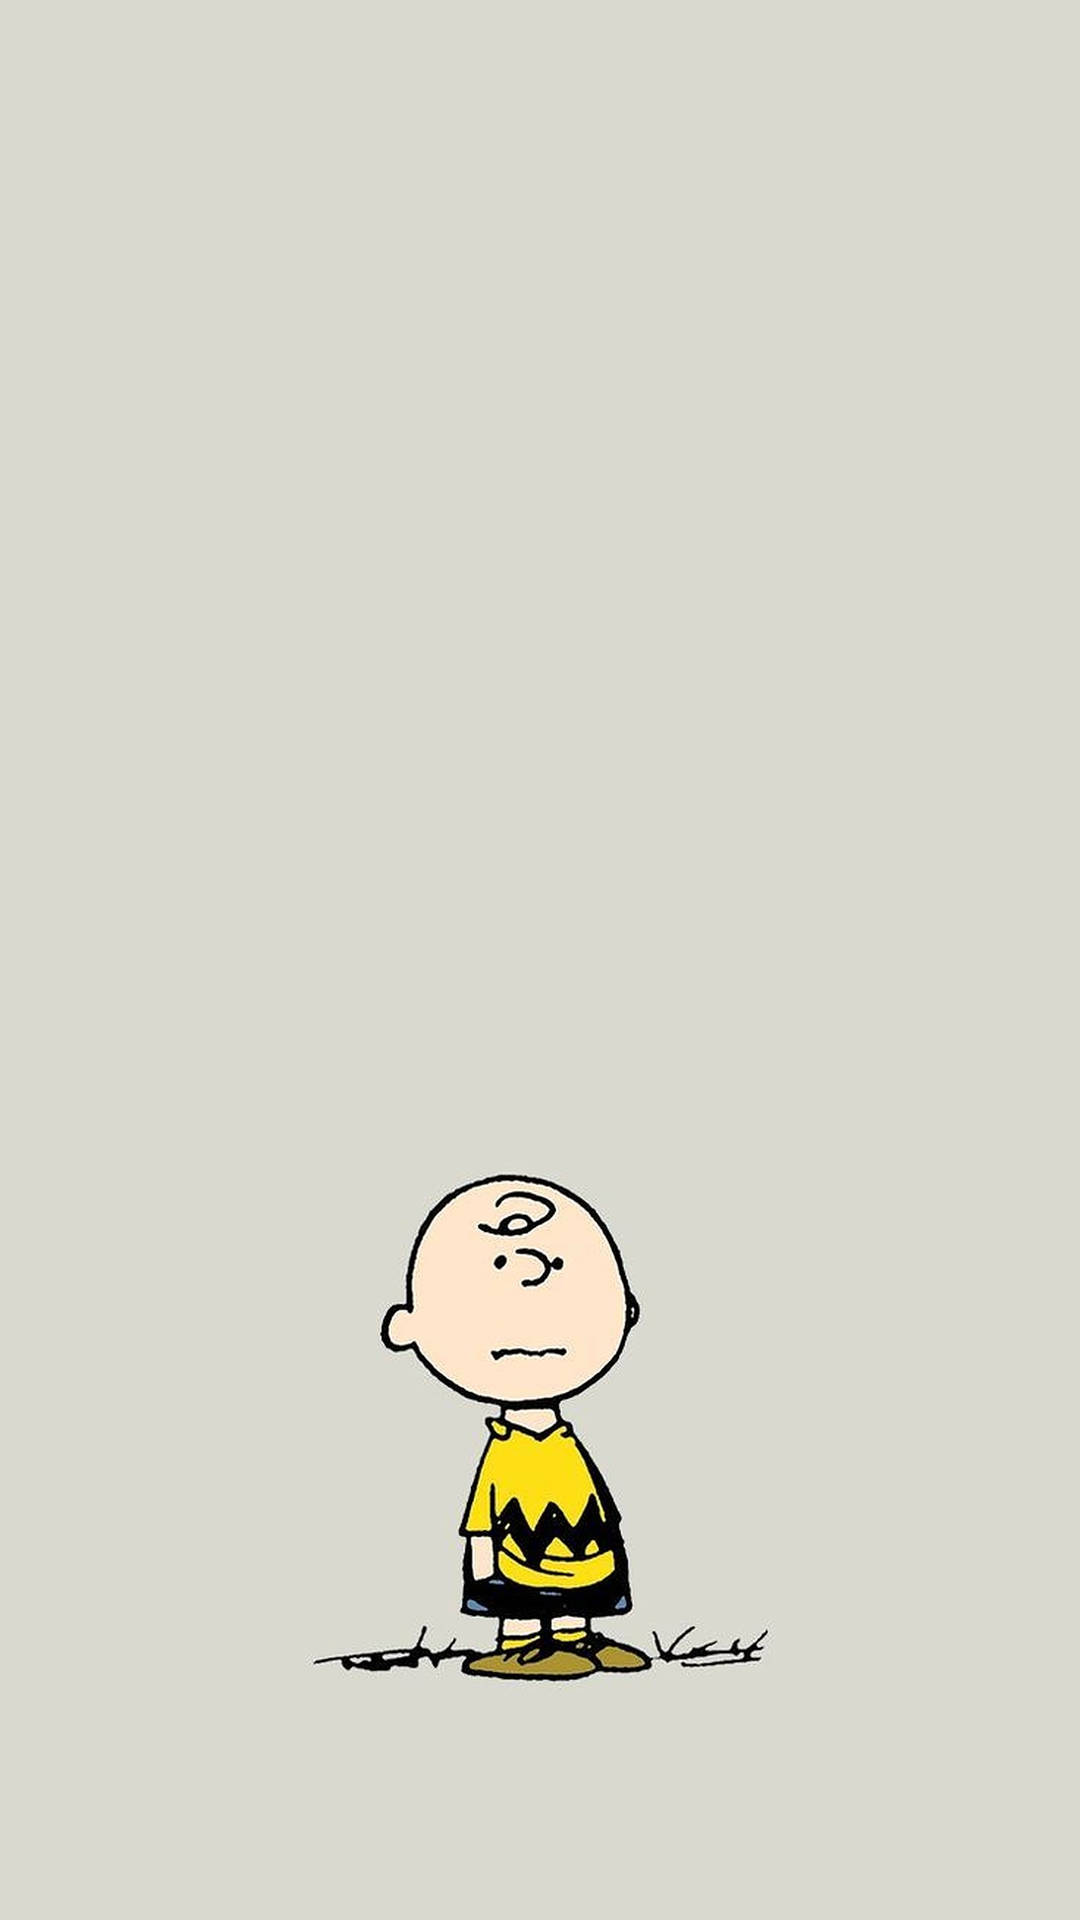 The peanuts gang in a cartoon style - Charlie Brown